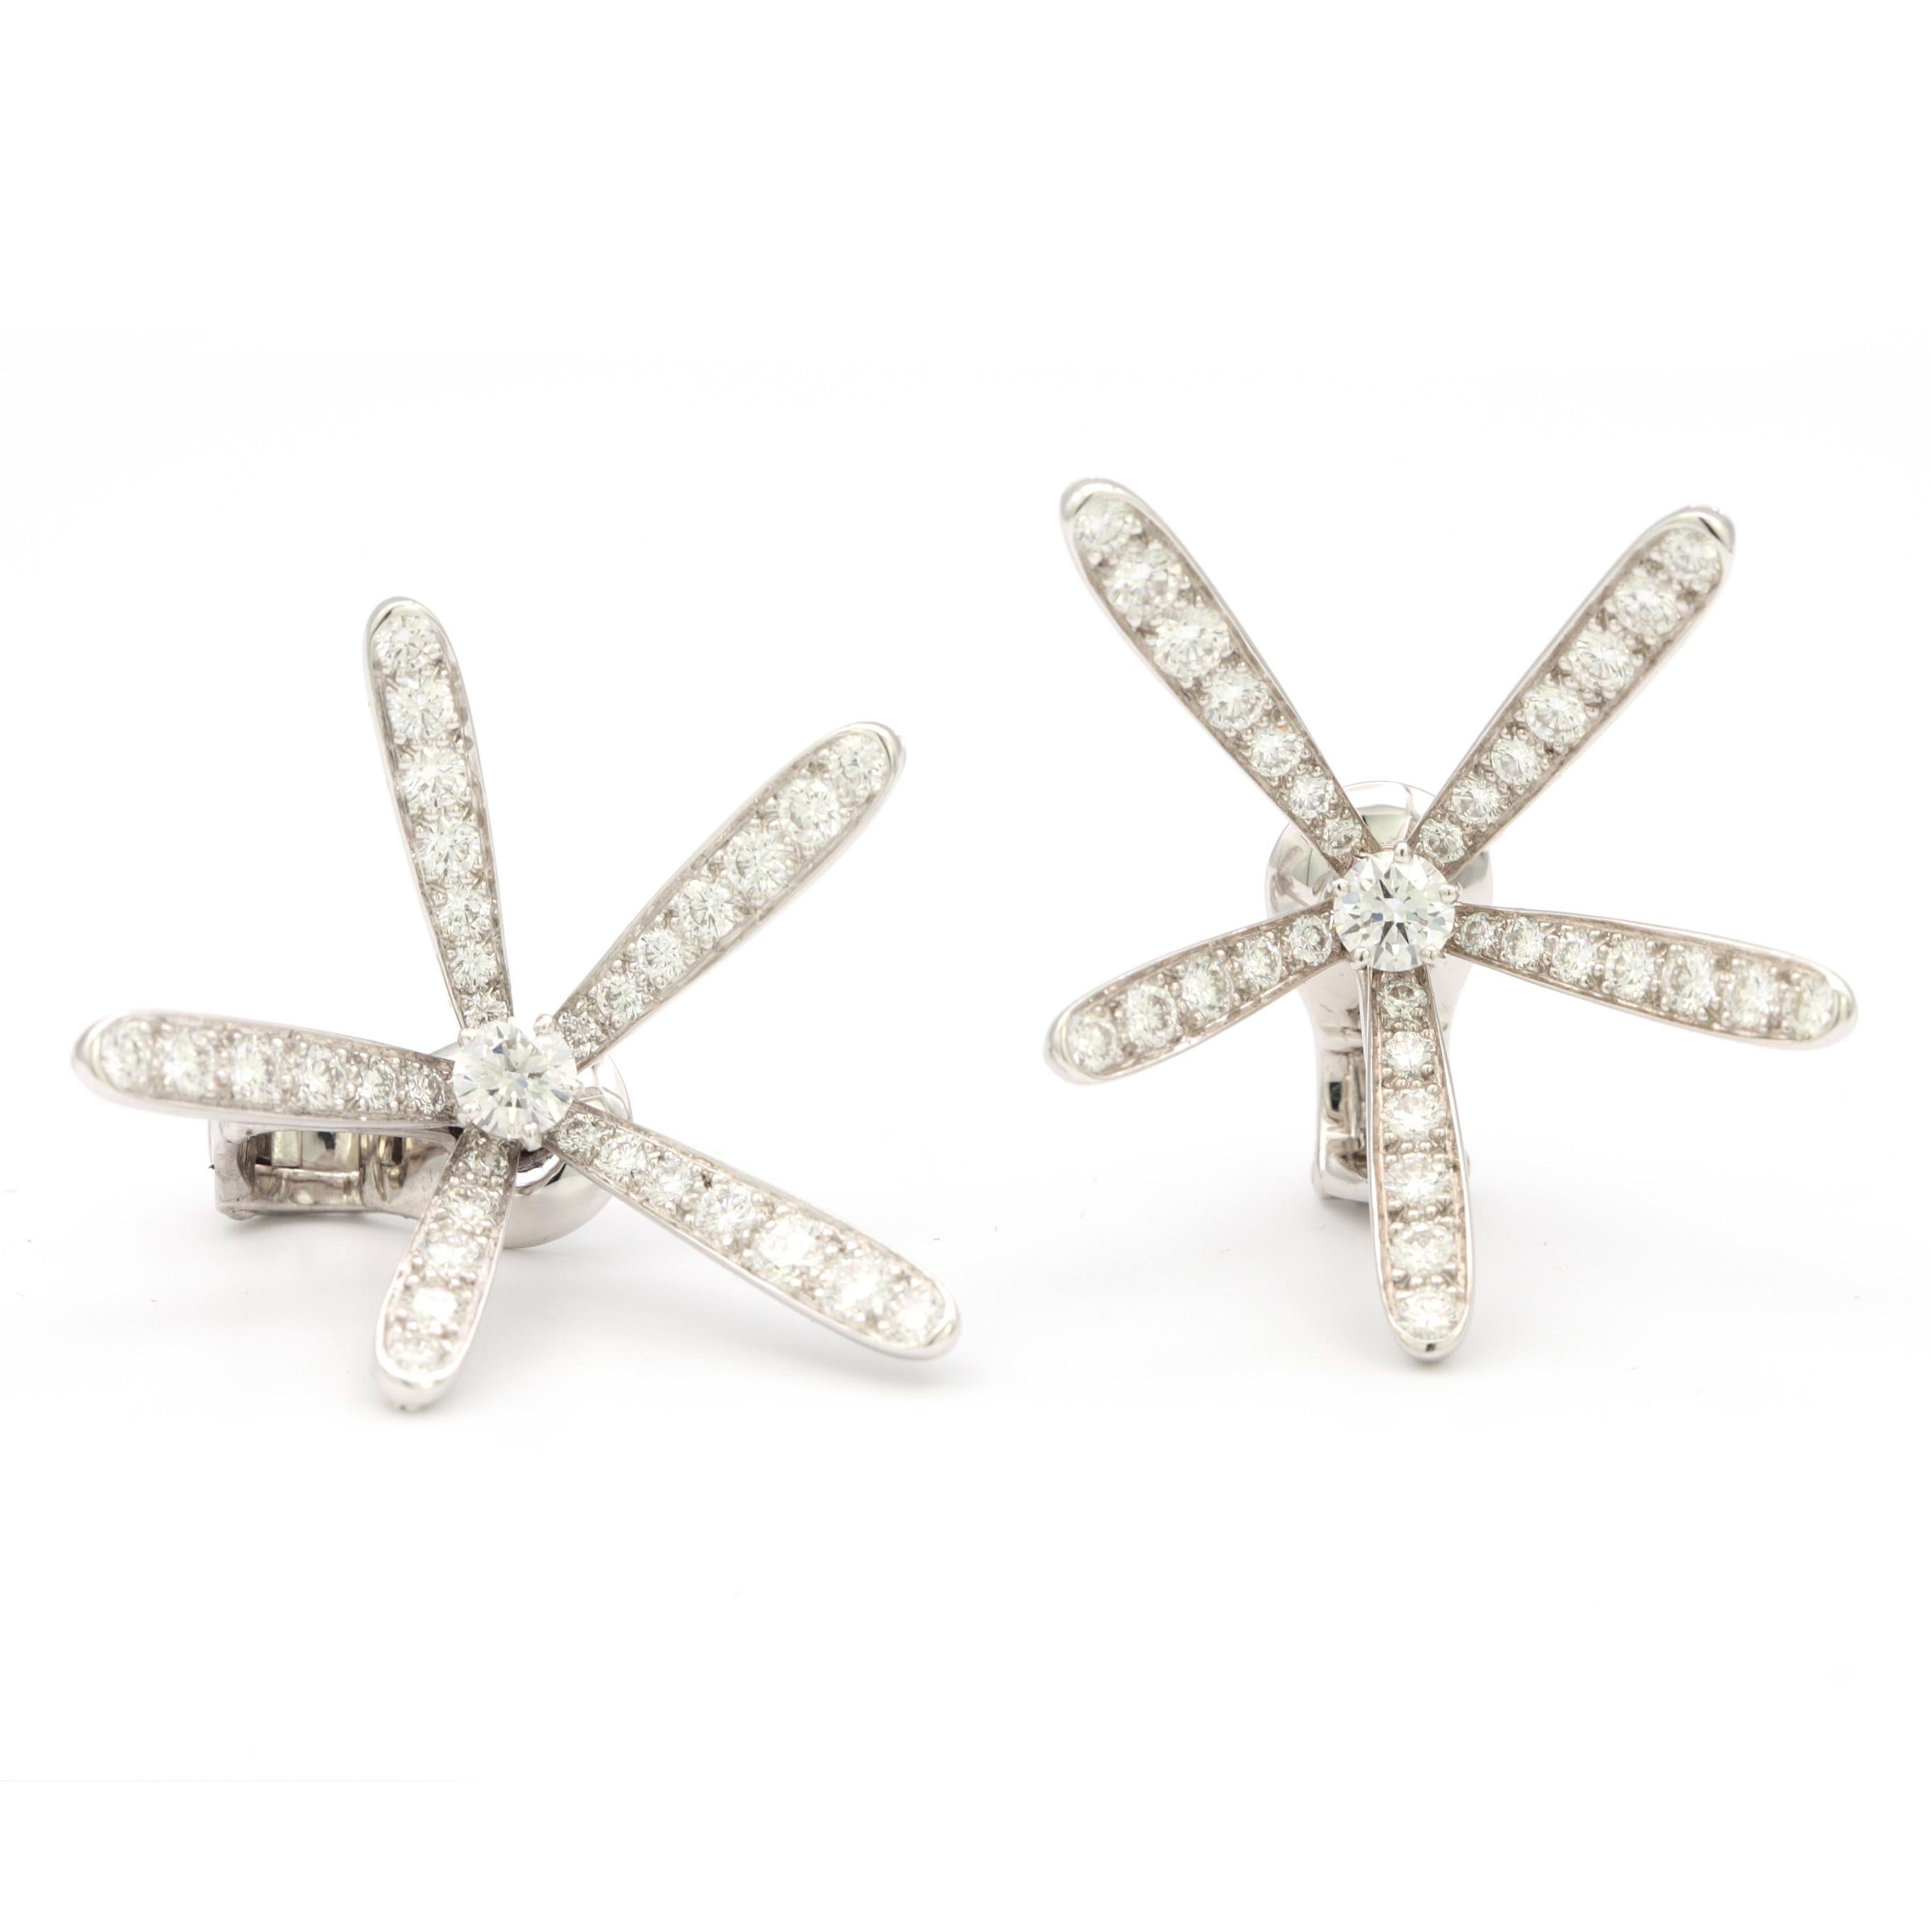 Contemporary Van Cleef & Arpels Caresse D'Eole White Gold and Diamond Earrings